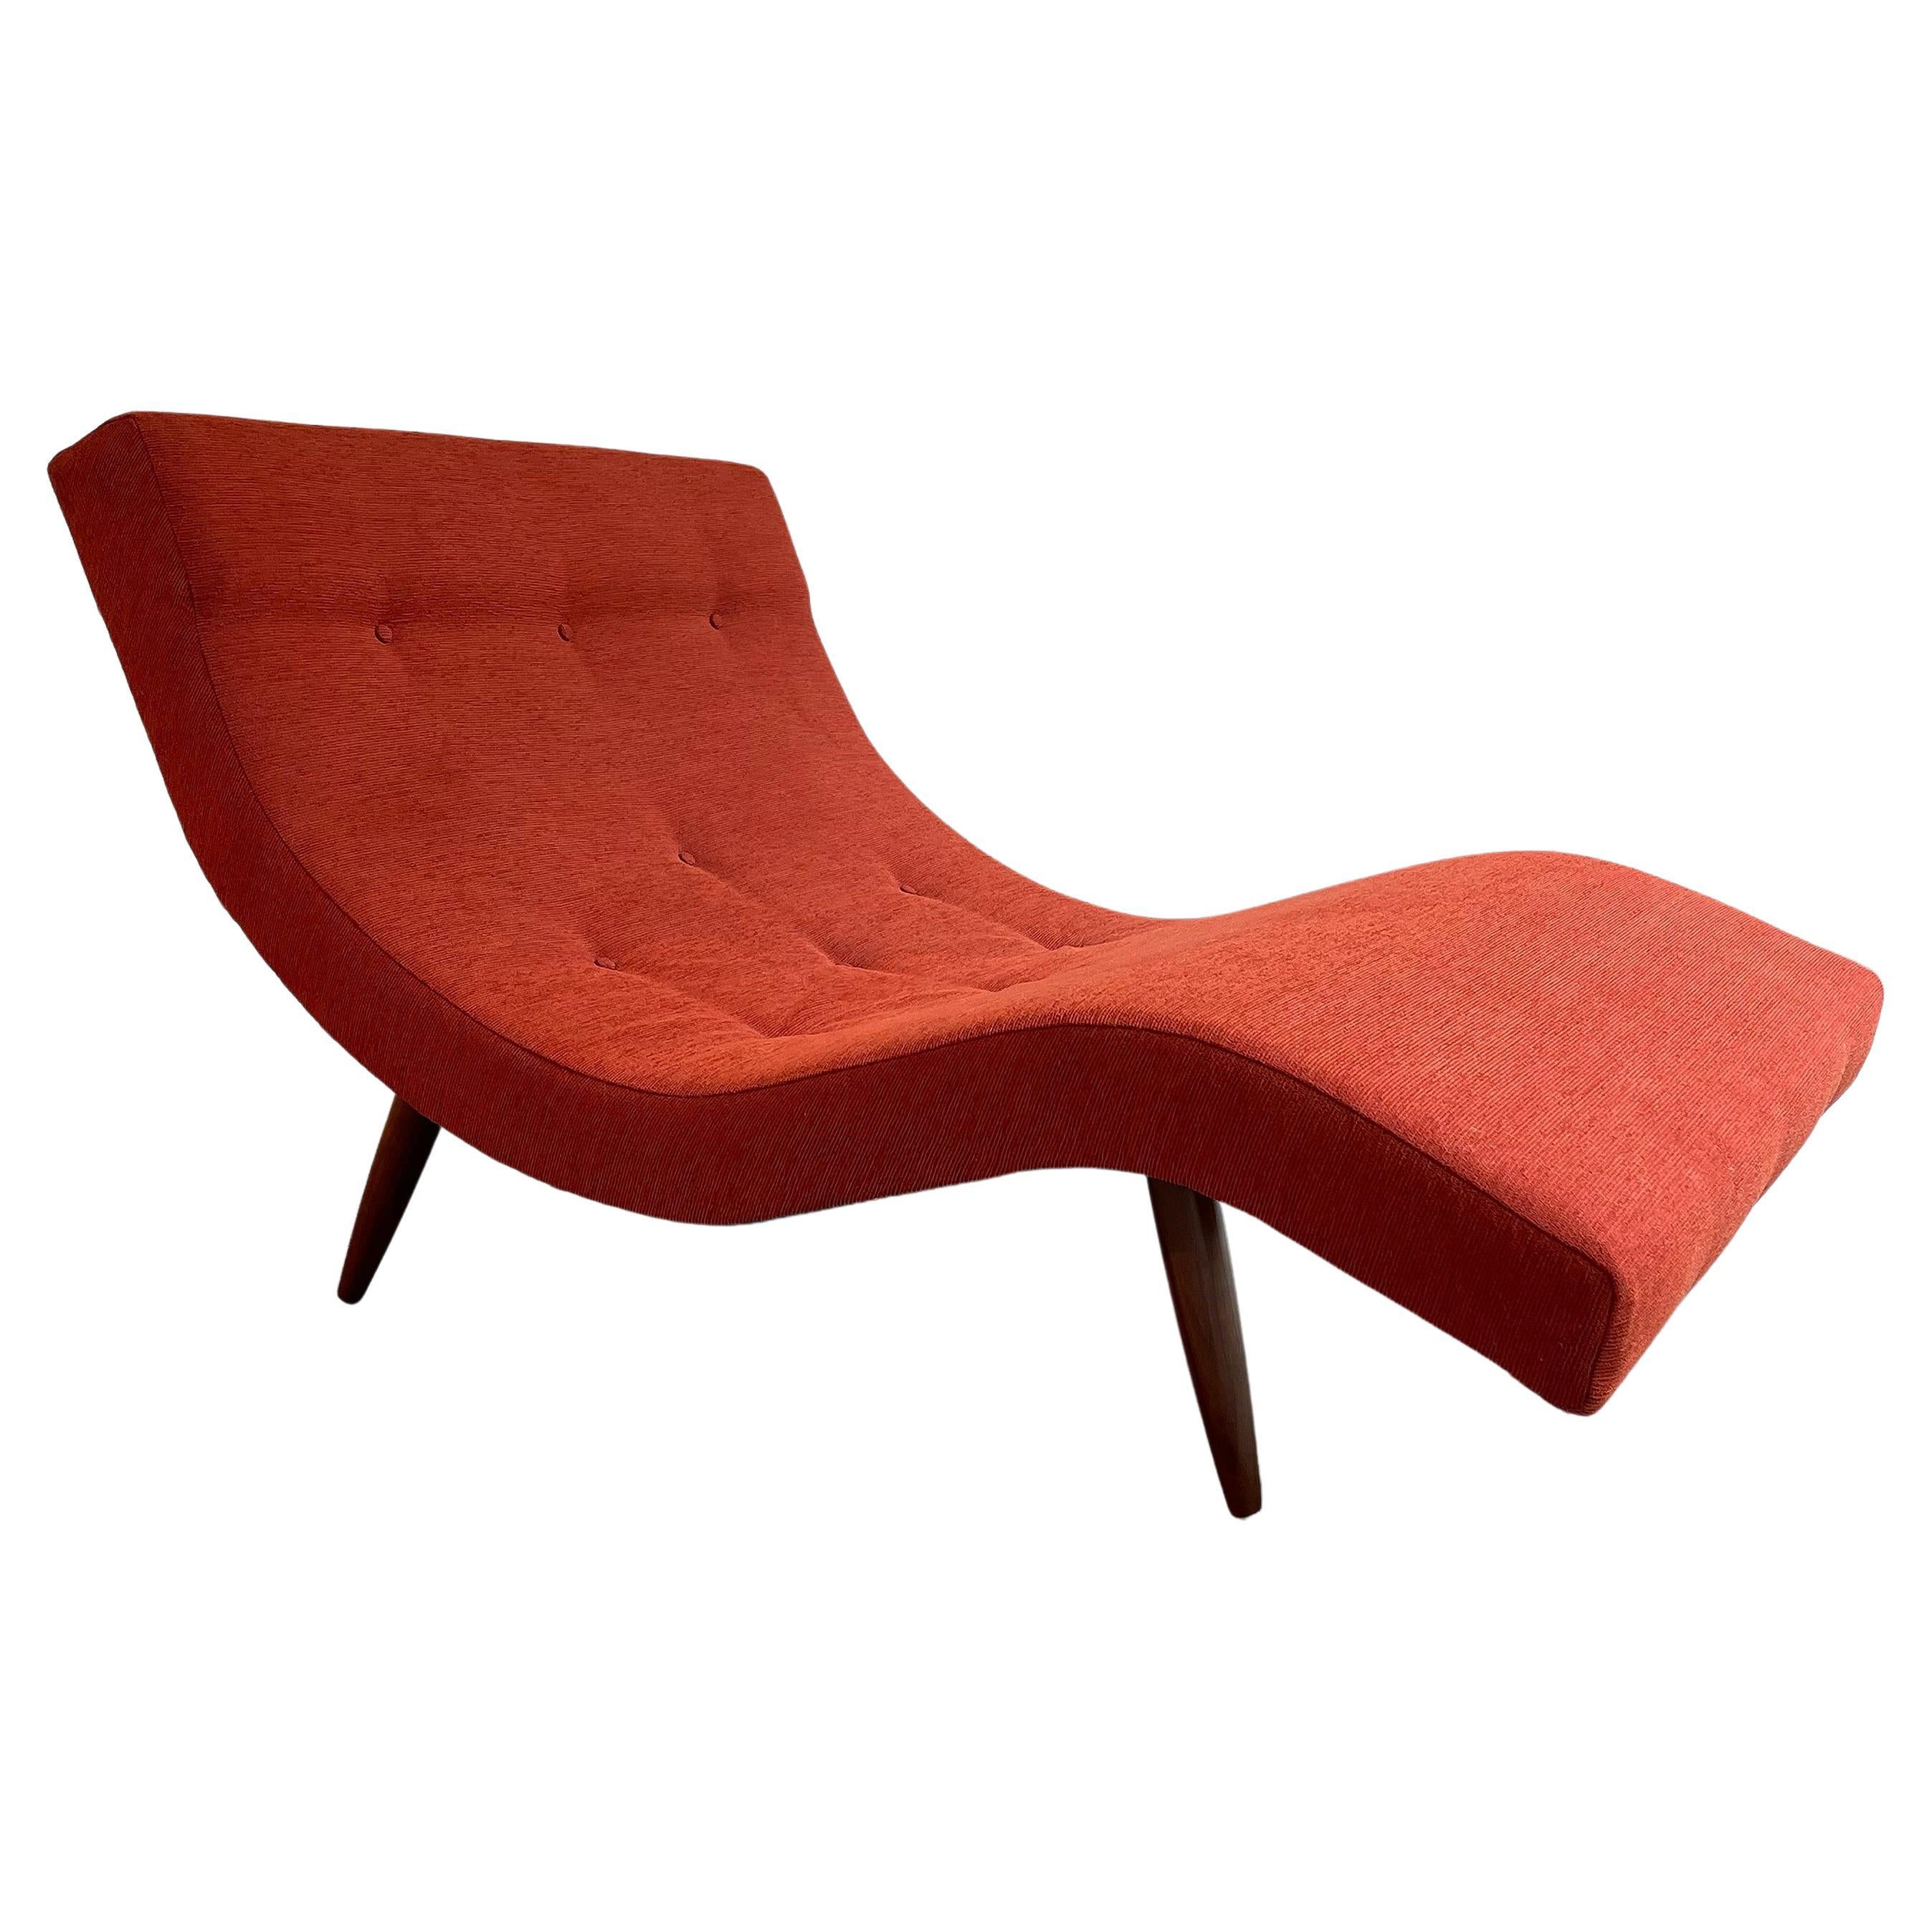 Mid-Century Modern Wave Chaise Longue by Adrian Pearsall